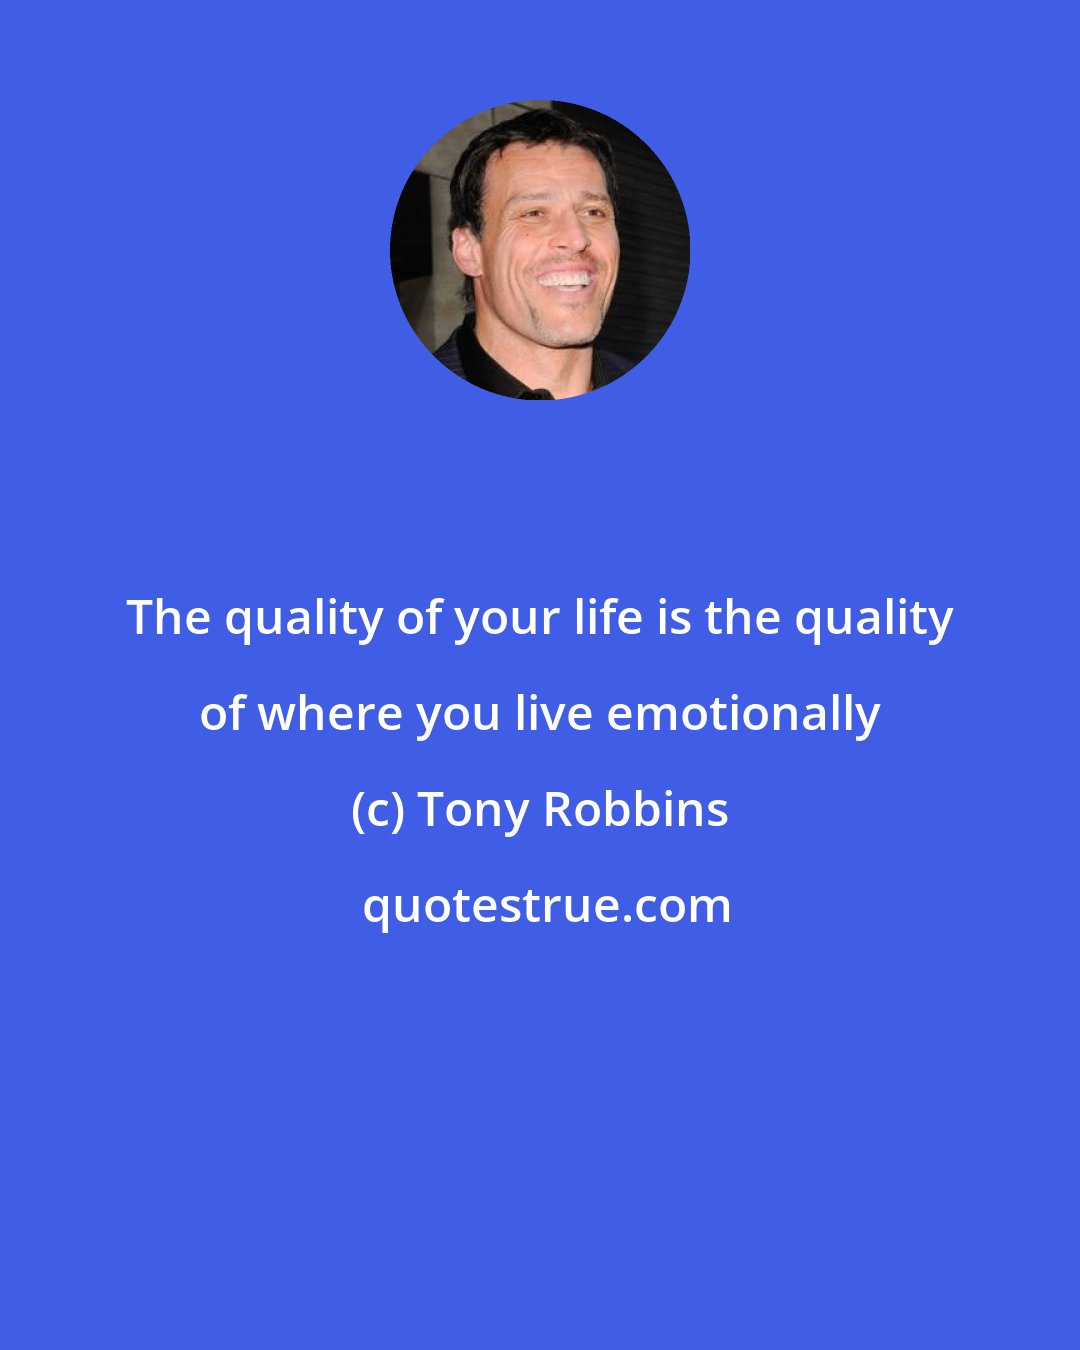 Tony Robbins: The quality of your life is the quality of where you live emotionally